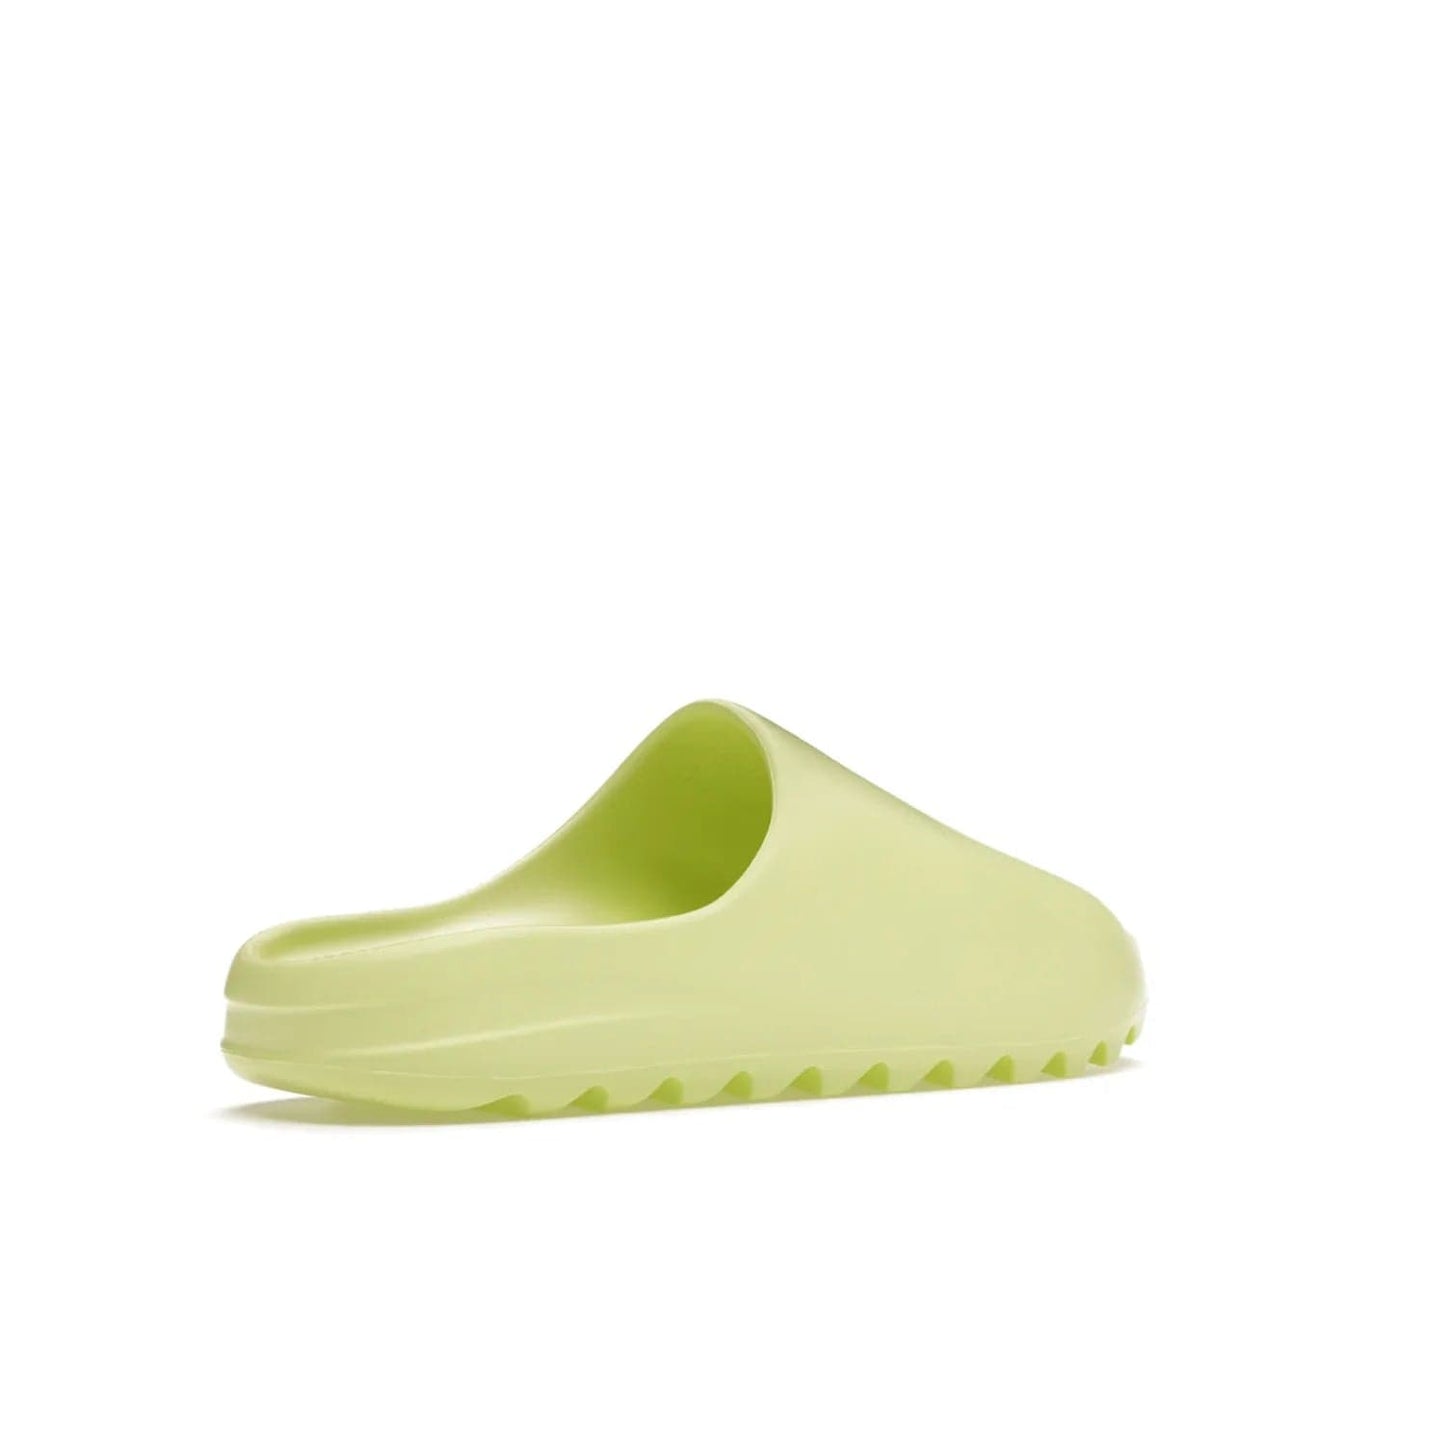 adidas Yeezy Slide Glow Green - Image 33 - Only at www.BallersClubKickz.com - Experience an unexpected summer style with the adidas Yeezy Slide Glow Green. This limited edition slide sandal provides a lightweight and durable construction and a bold Glow Green hue. Strategic grooves enhance traction and provide all-day comfort. Make a statement with the adidas Yeezy Slide Glow Green.